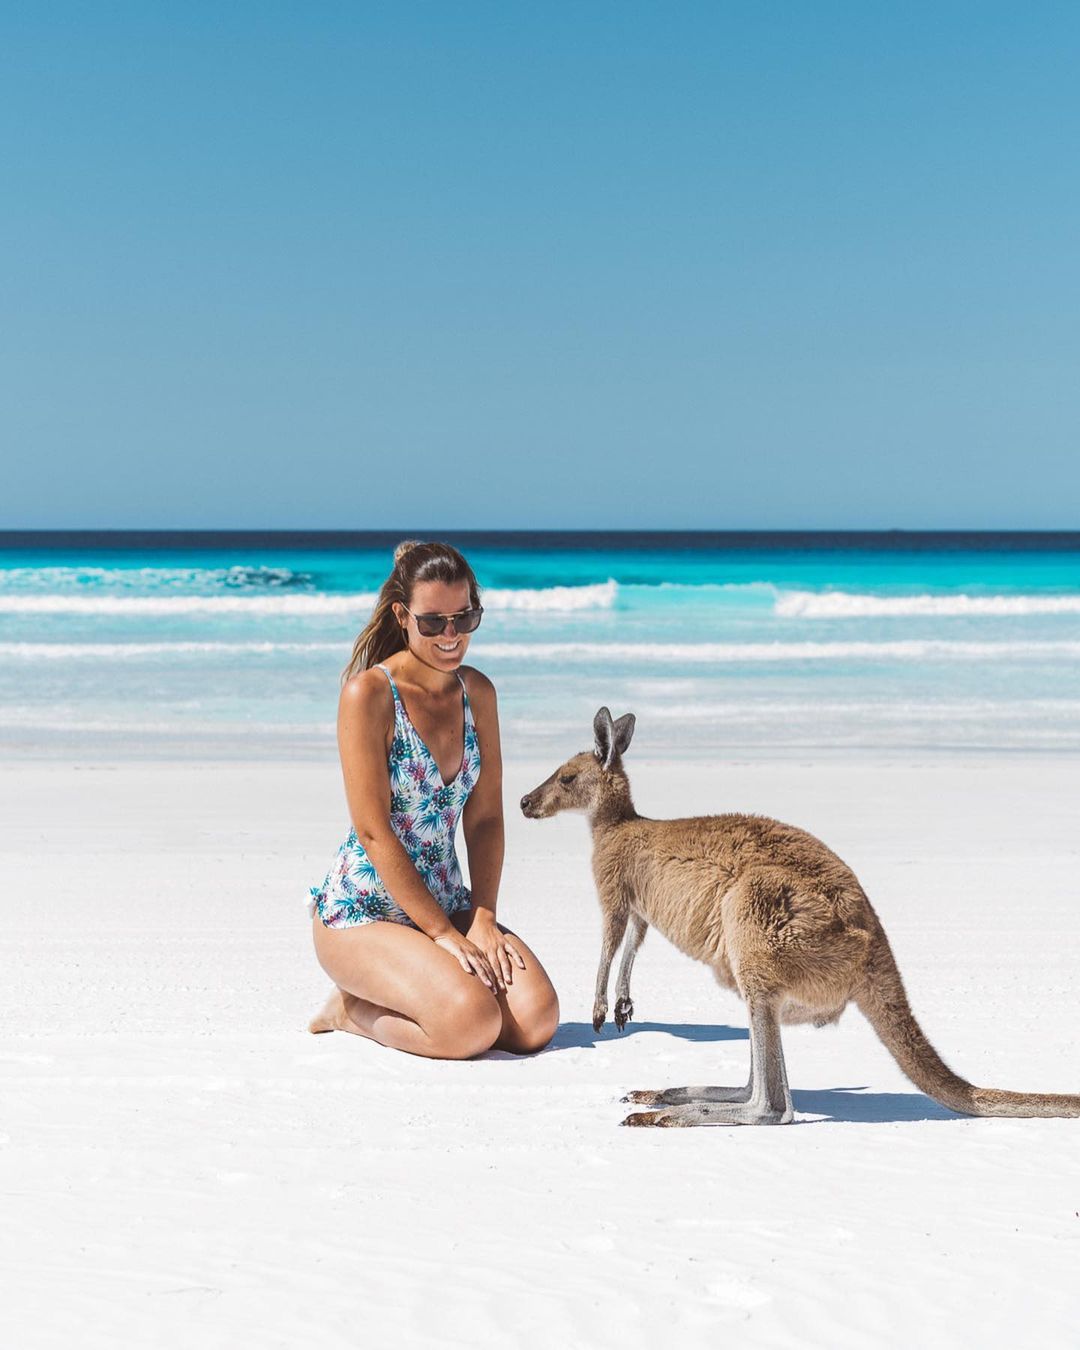 In general, the kangaroos here are friendly and pleasant, relatively small in size.  Photo: @allaboutwanderlust